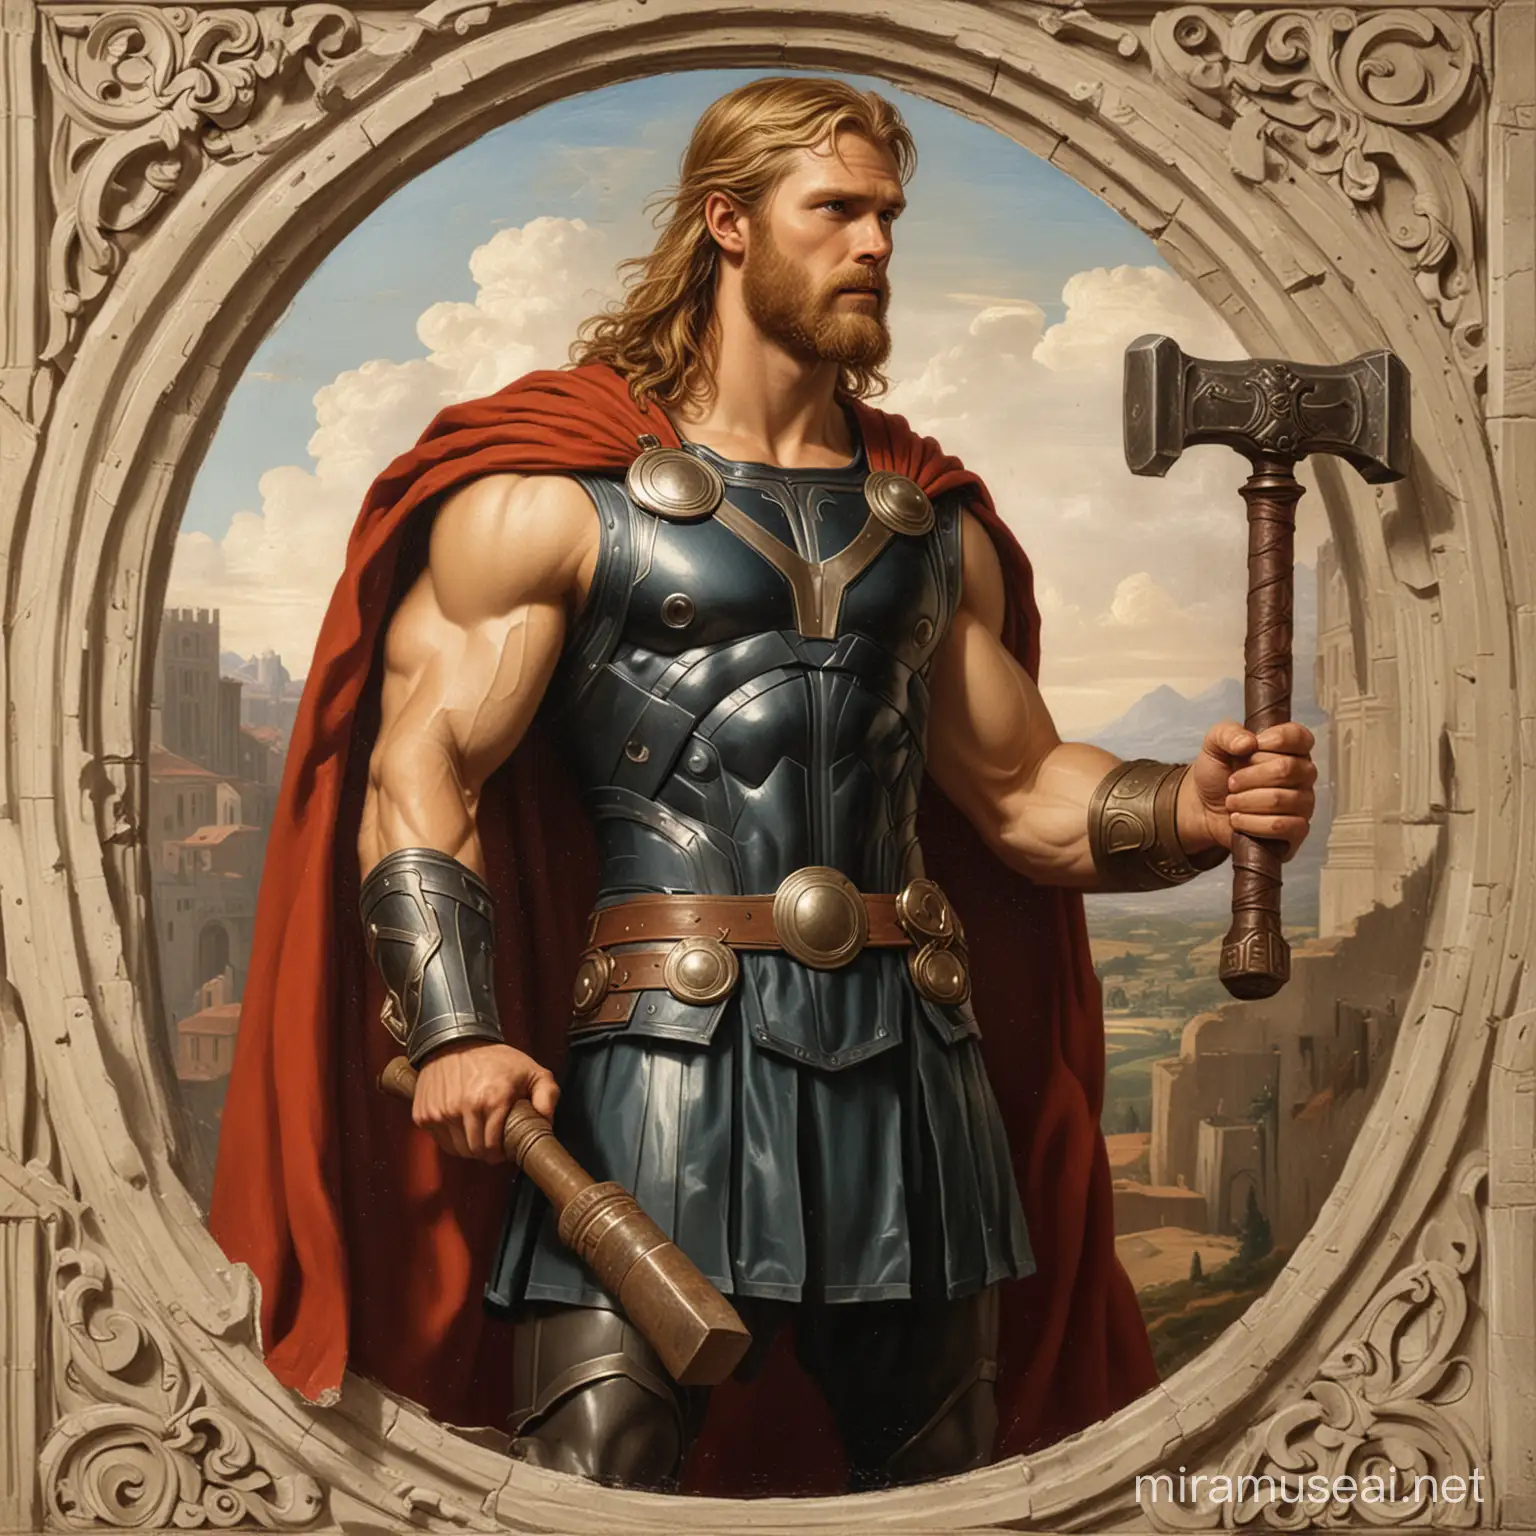 Thor with his hammer painted in italien renaissance style.